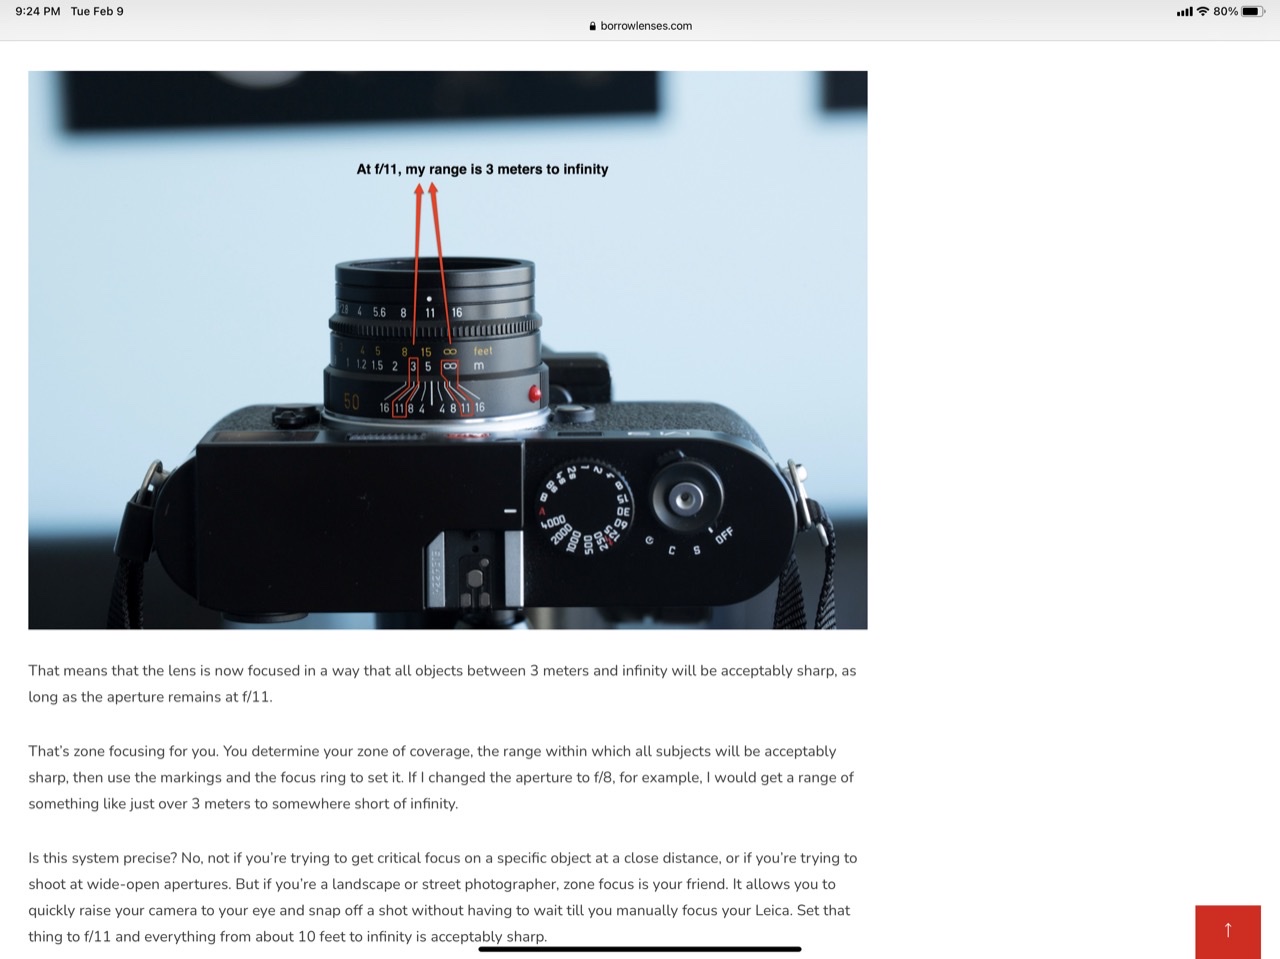 Review: The New Leica M6 (might not be the camera you're looking for) -  Photography Blog Tips - ISO 1200 Magazine